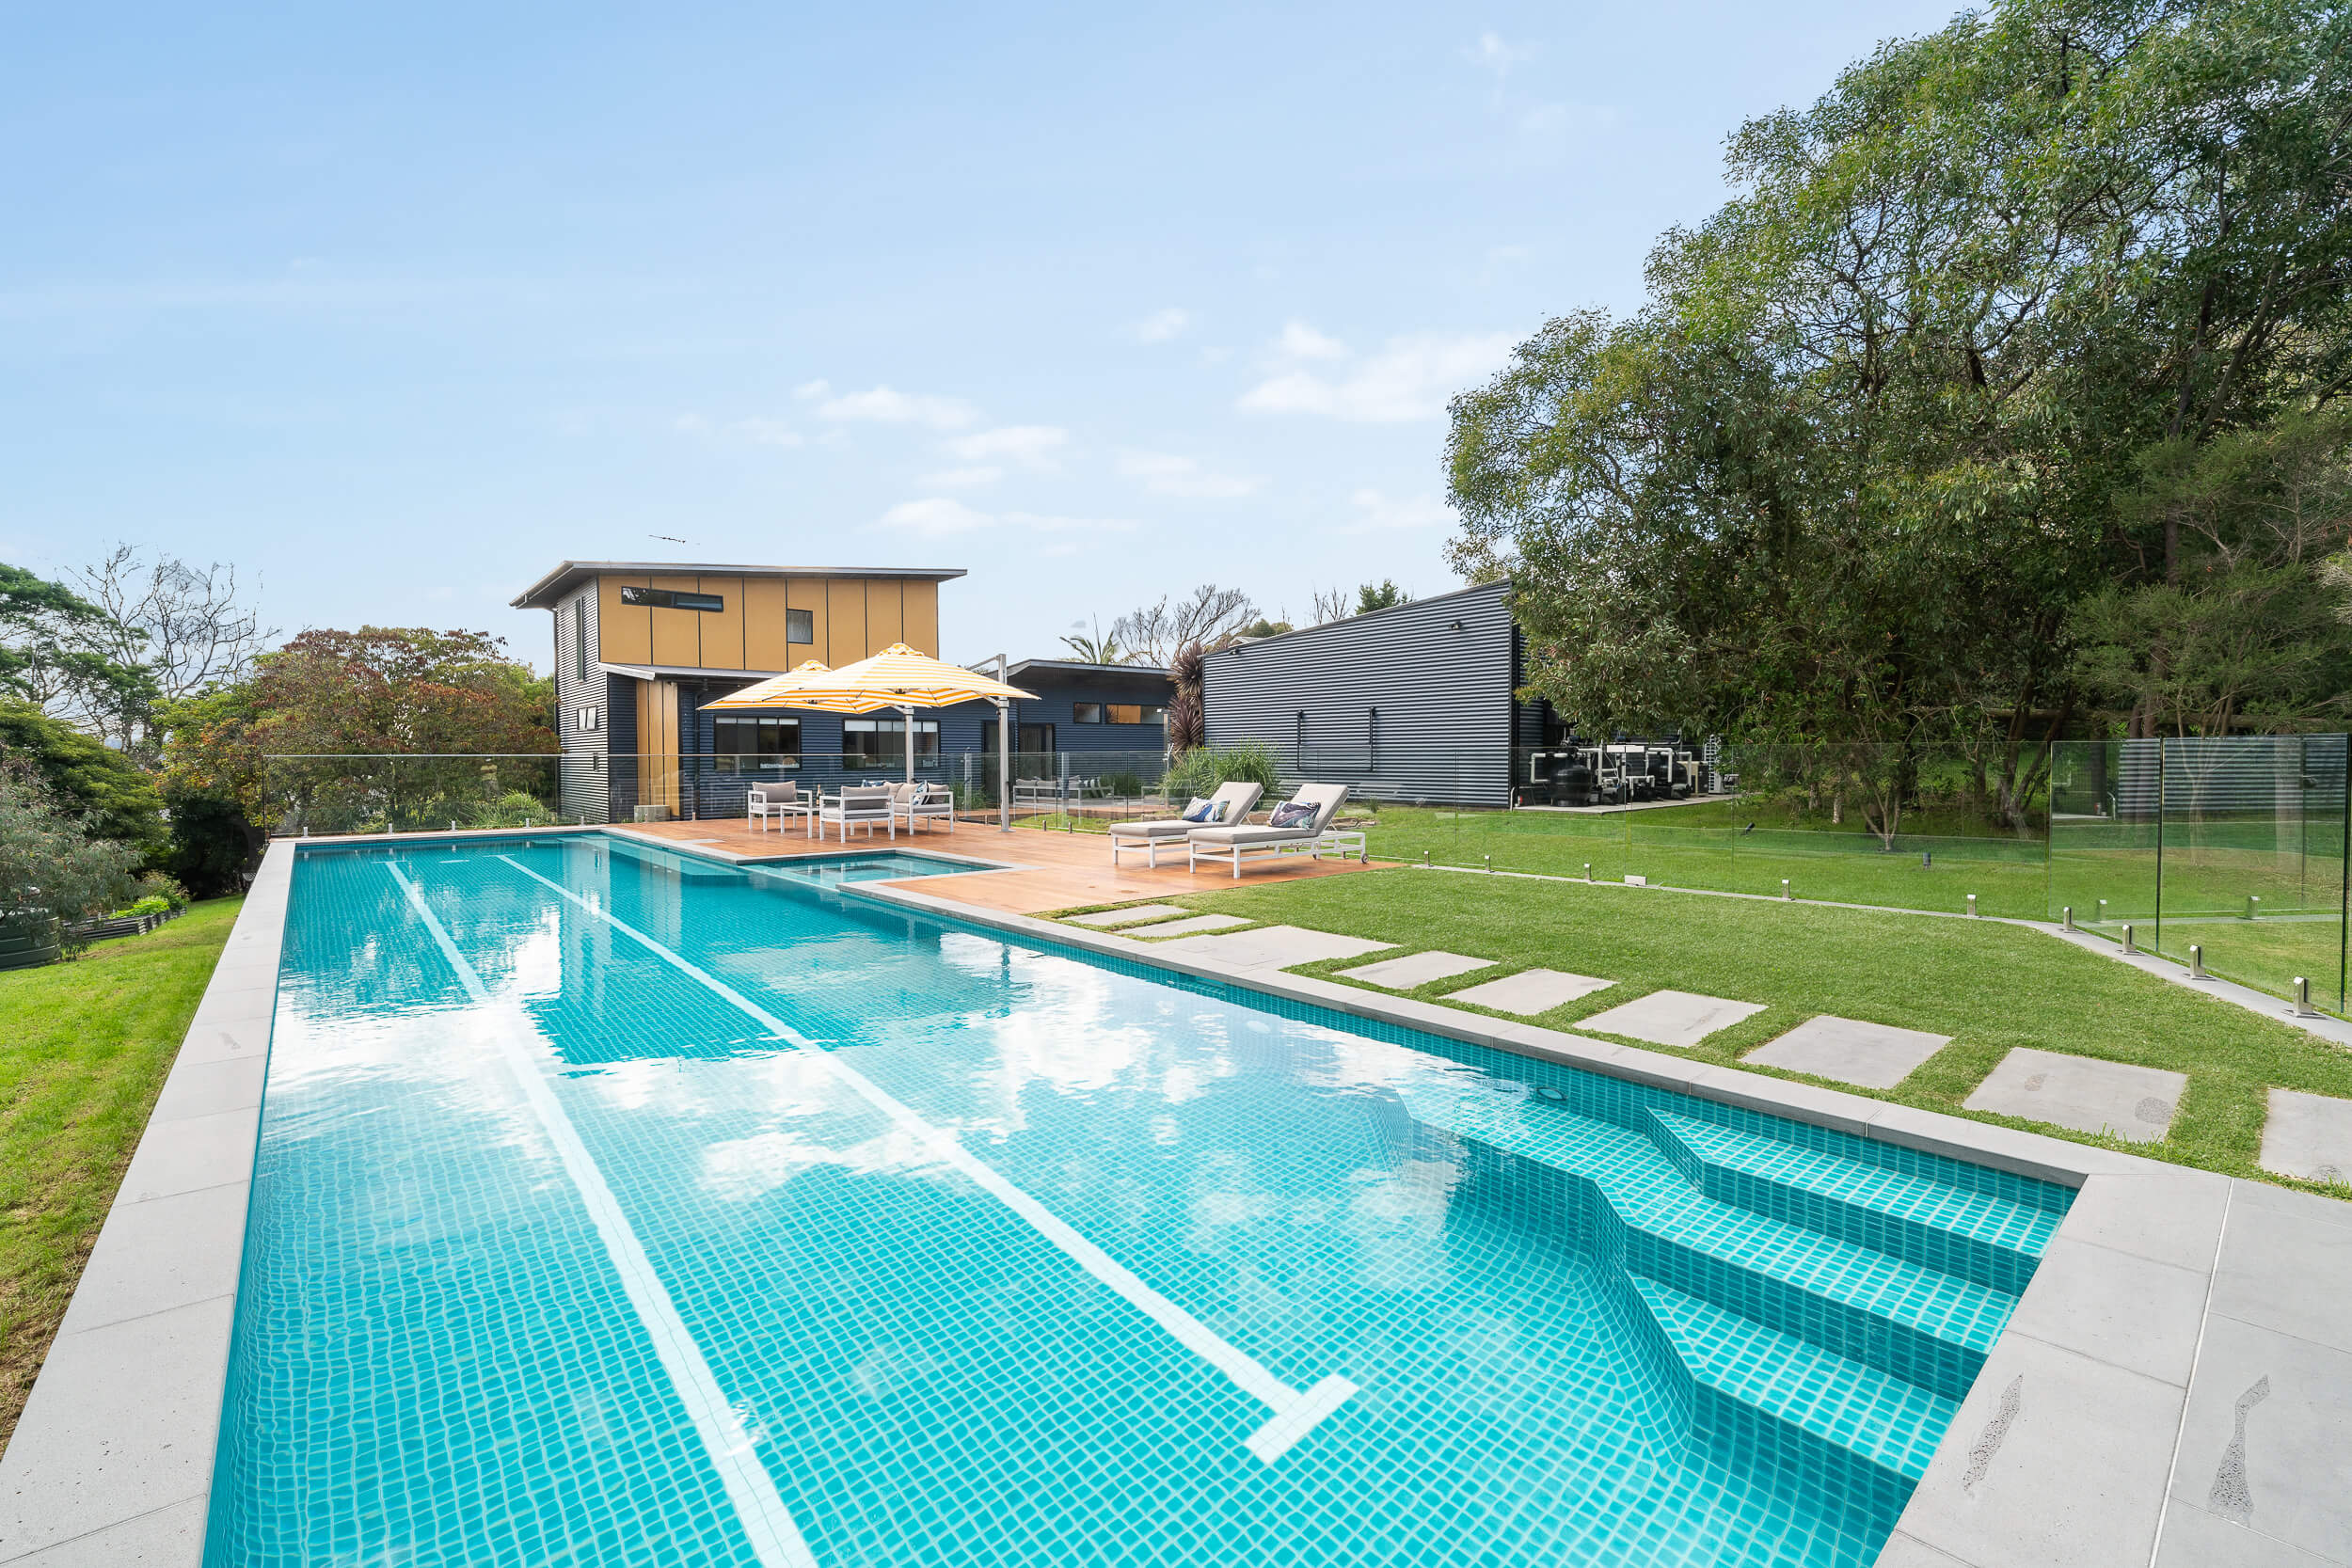 Completed swimming pool, spa and wooden decking entertainment area at Mount Martha.